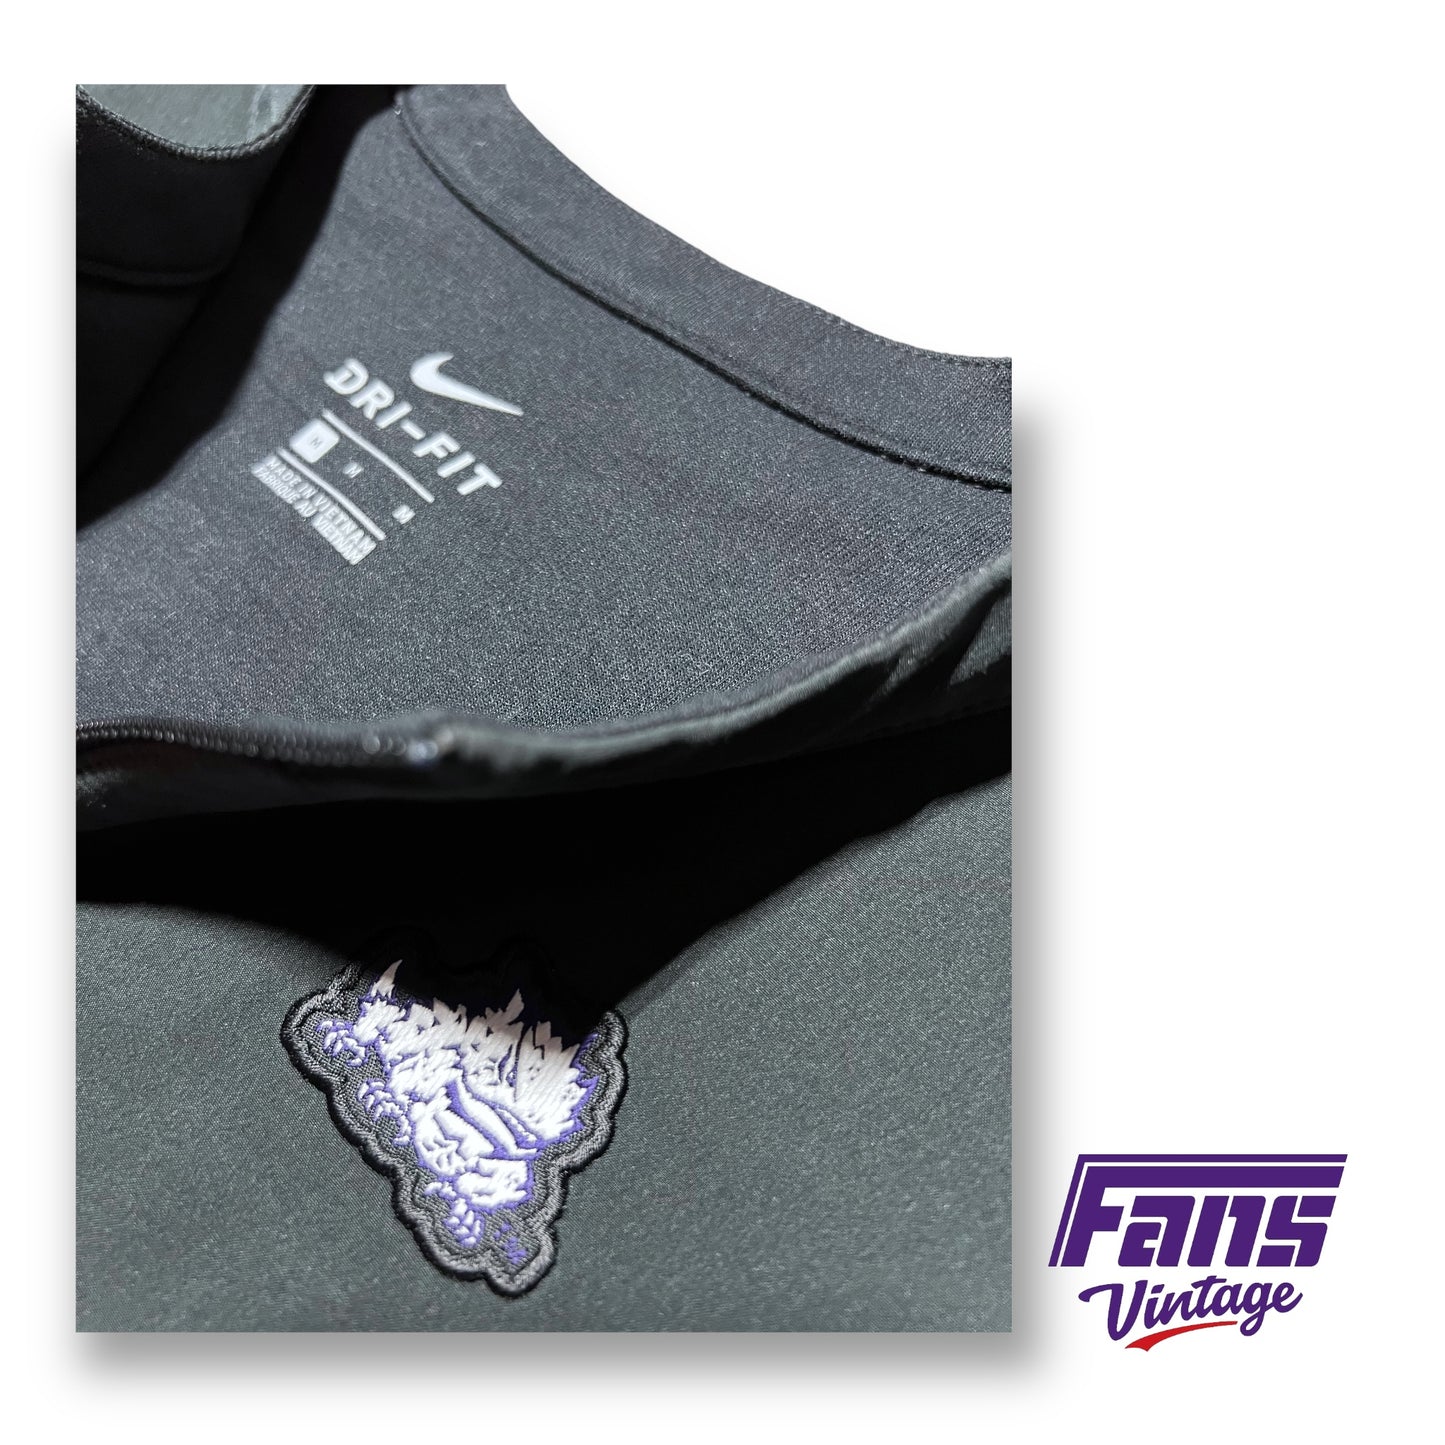 TCU Team Issue Blackout Nike “On Field” Sideline Collarless Quarter Zip Pullover